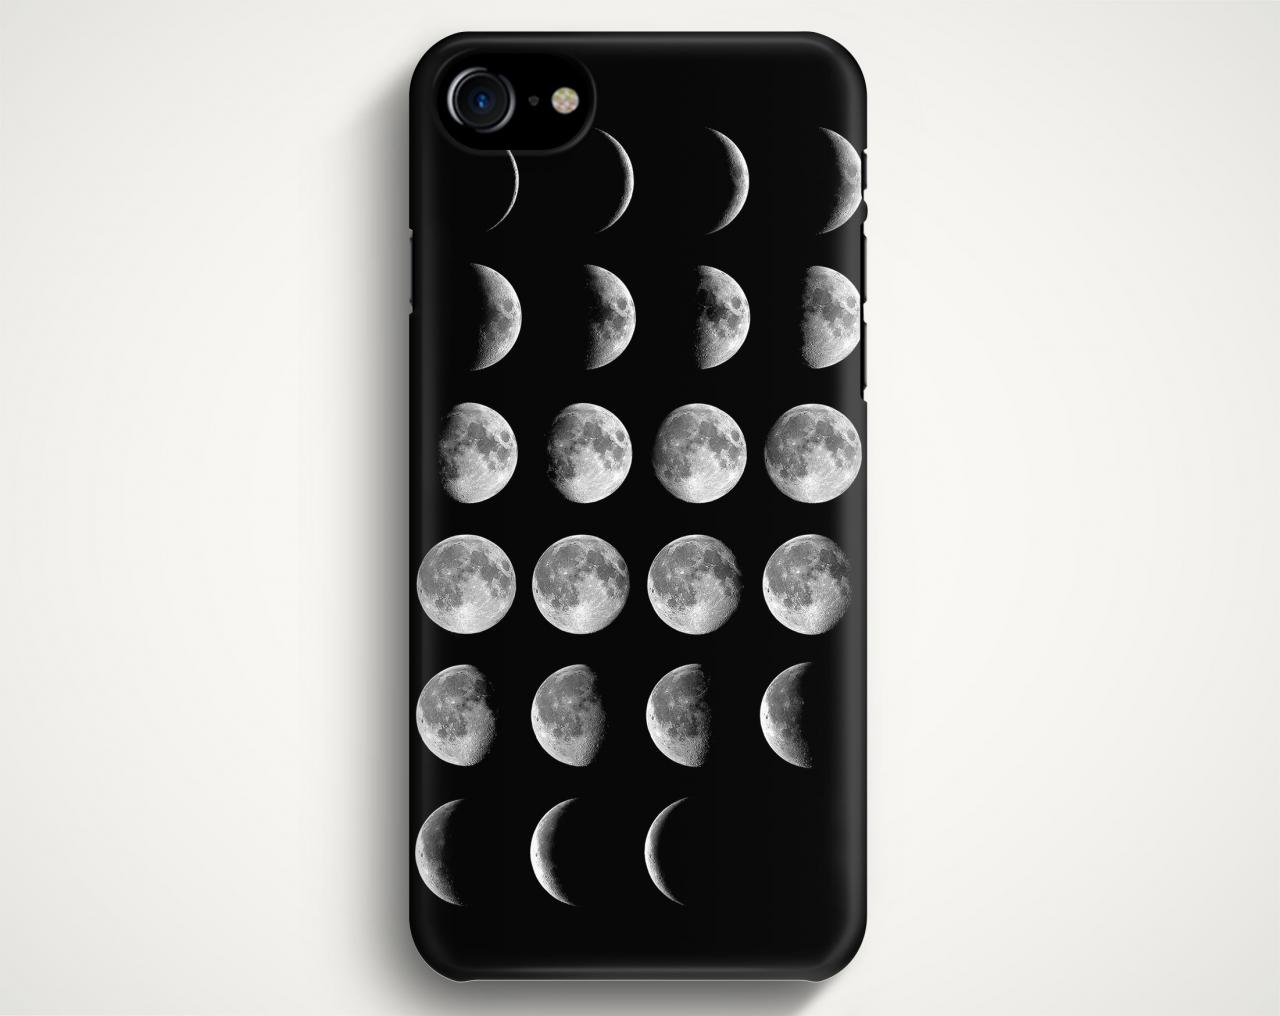 Moon Phases Case For Iphone 7 Iphone 7 Plus Samsung Galaxy S8 Galaxy S7 Galaxy A3 Galaxy A5 Galaxy A7 Lg G6 Lg G5 Htc 10